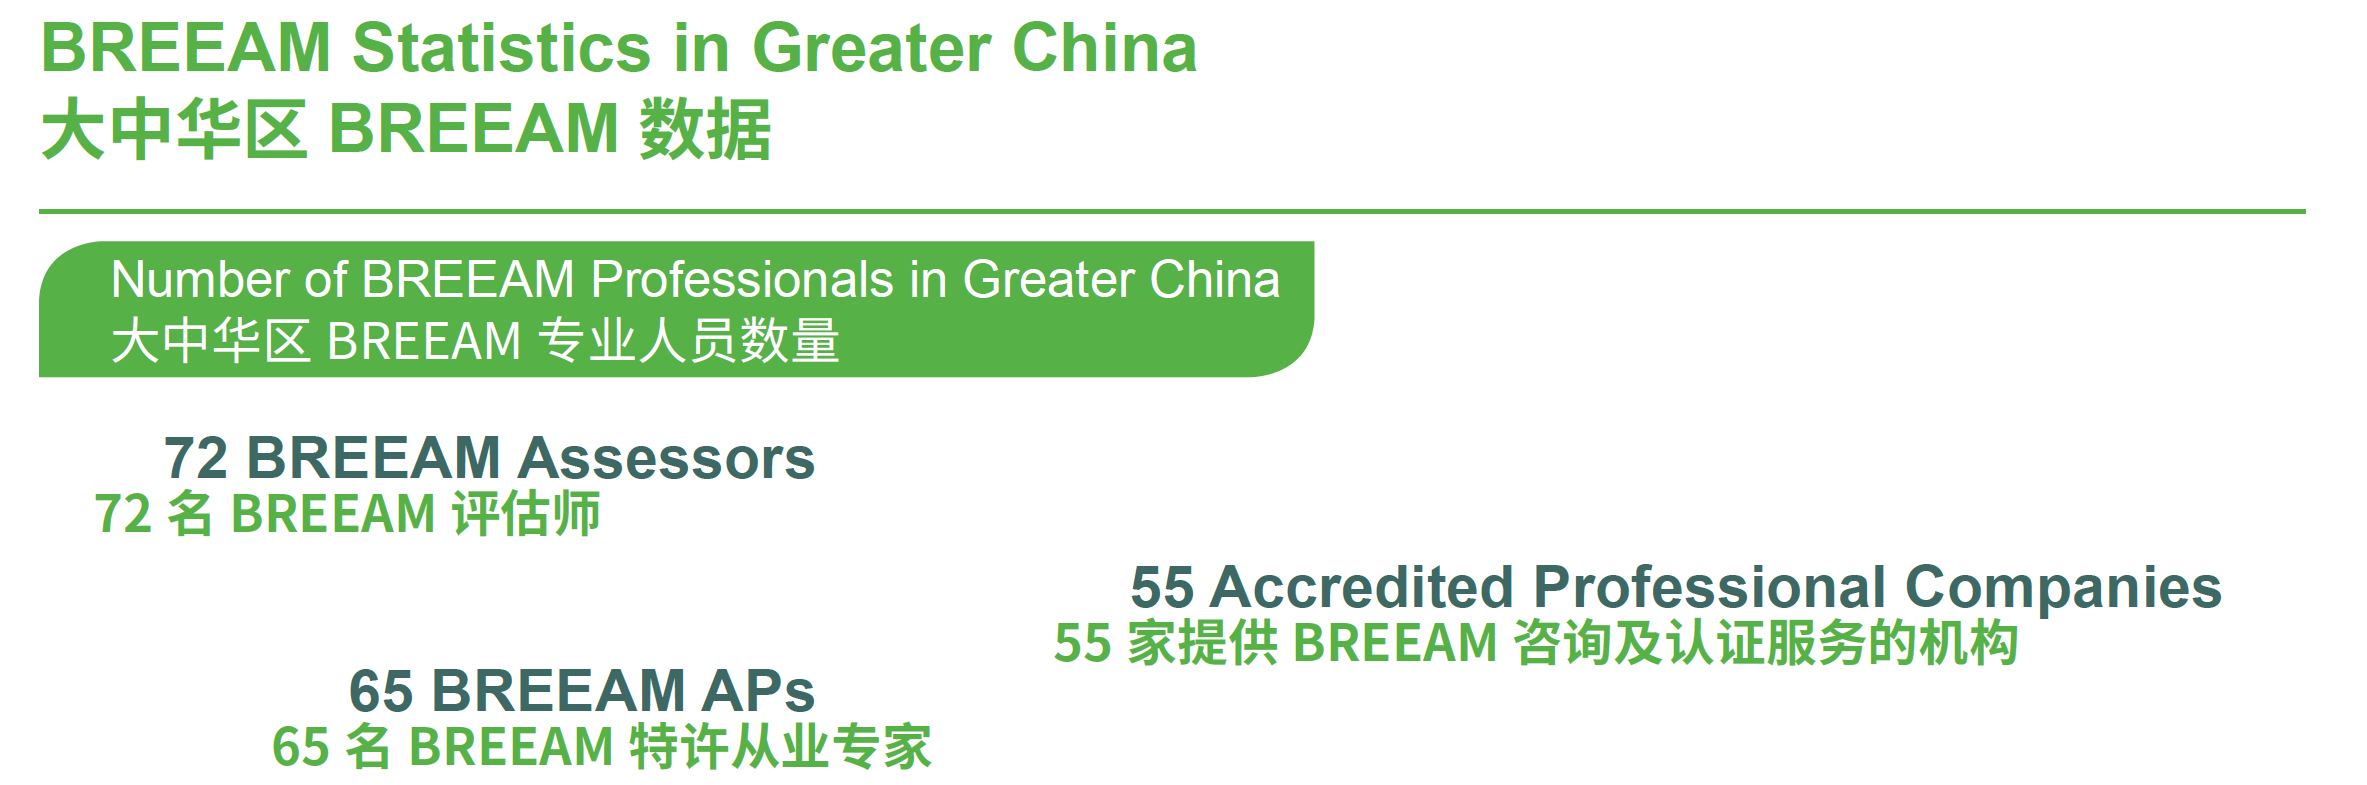 Number of BREEAM Professionals in Greater China